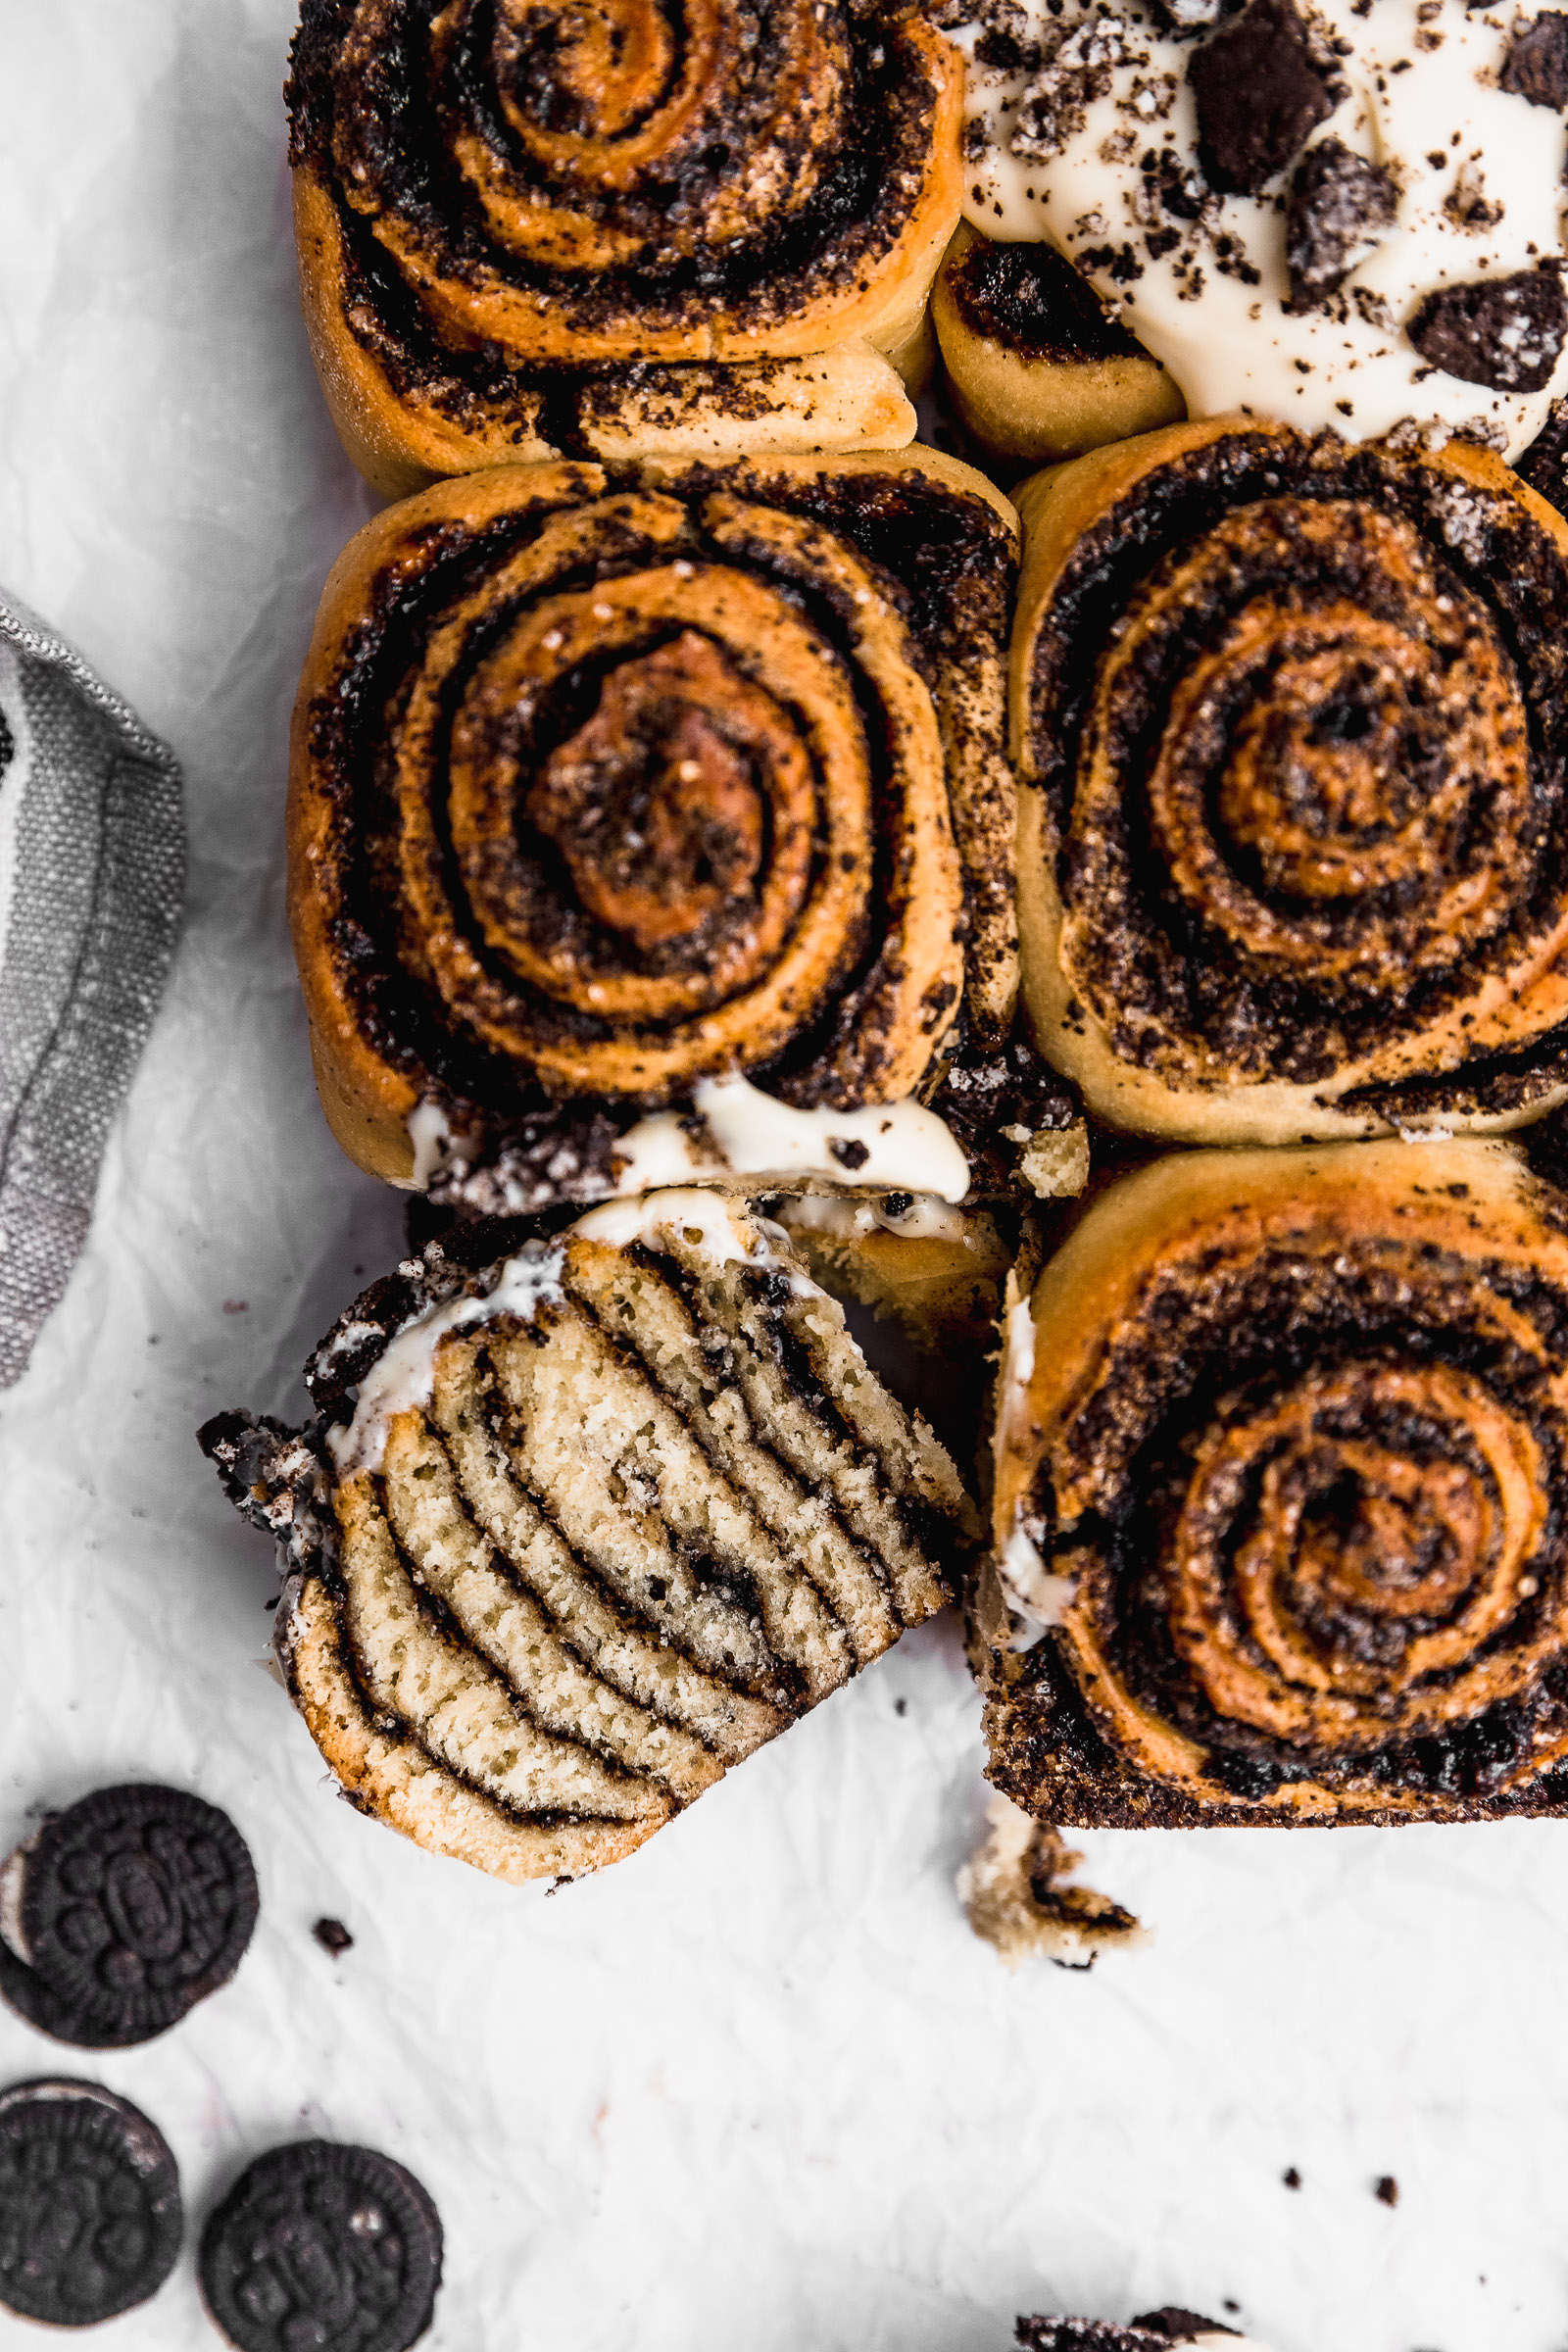 Top view of Oreo Cinnamon Rolls. One of them at the corner is cut in half and you can see the fluffy crumb as well as the black-coloured filling.